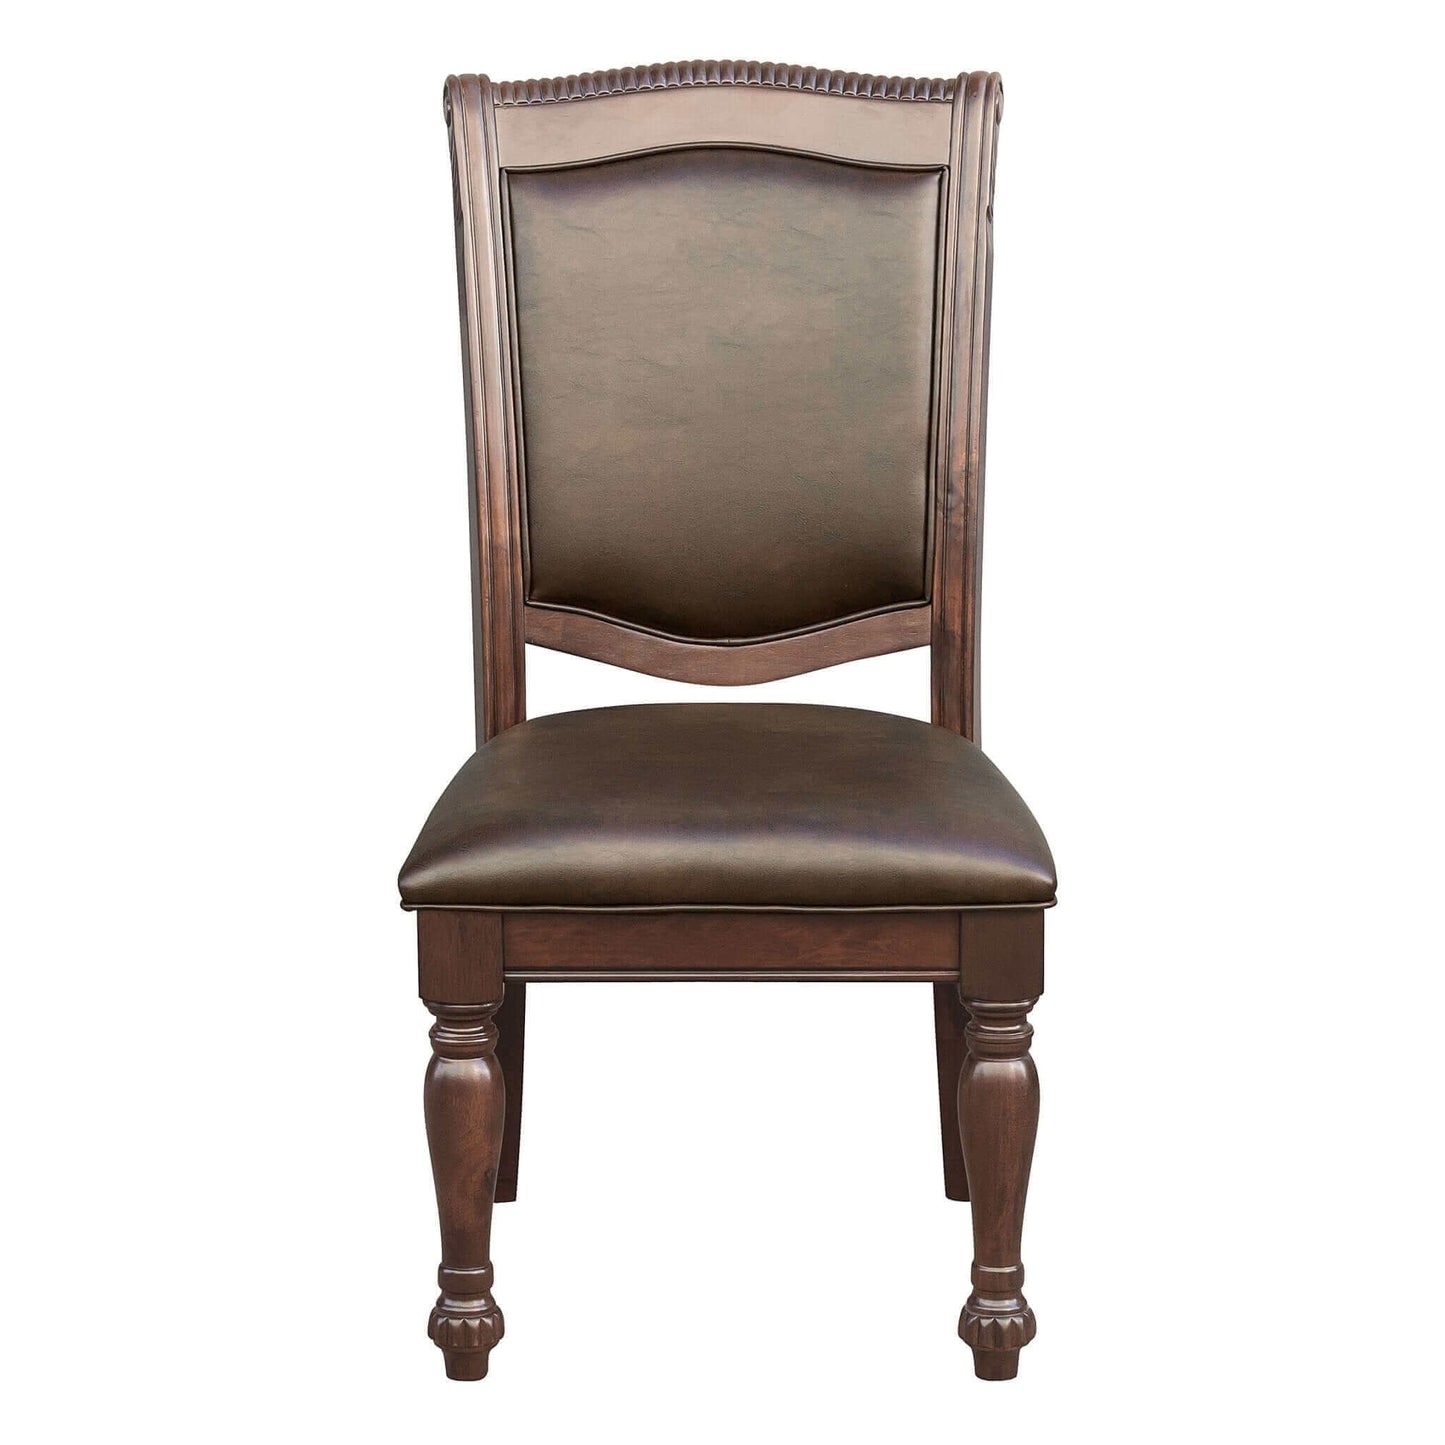 Traditional brown cherry finish side chair with upholstered seat from 9-piece dining set